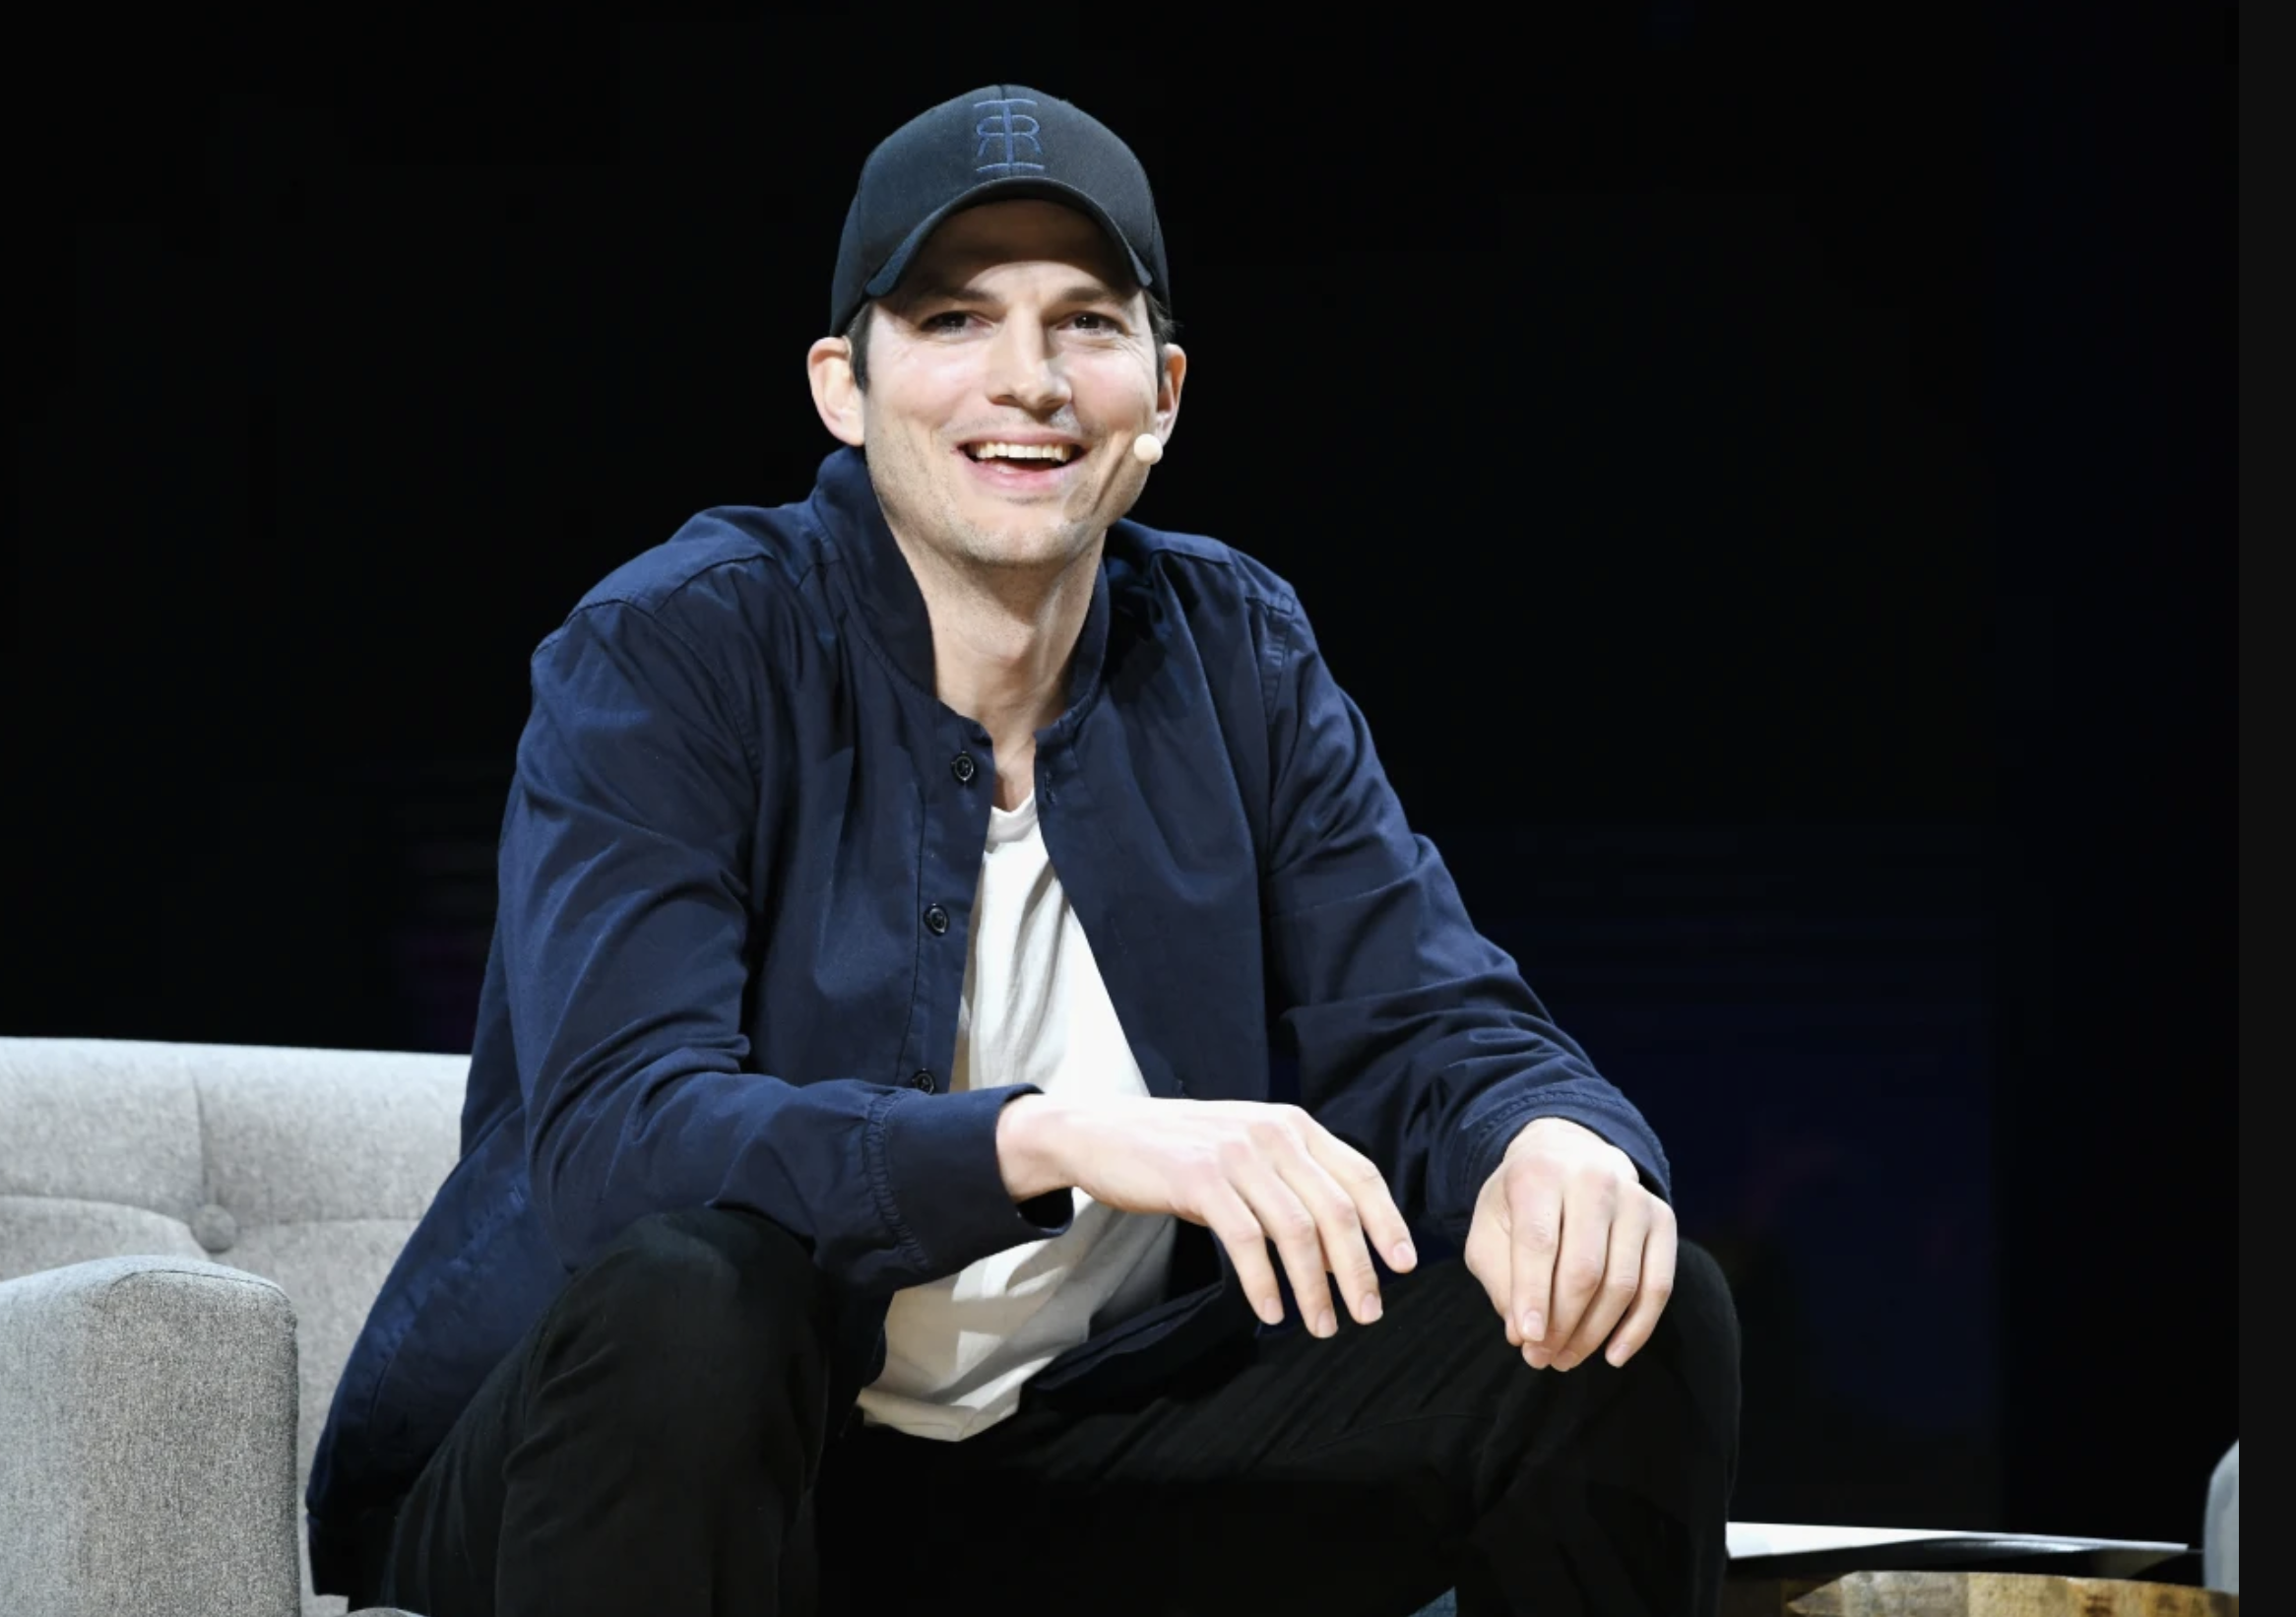 Ashton Kutcher’s Net Worth in 2022 – Find Out